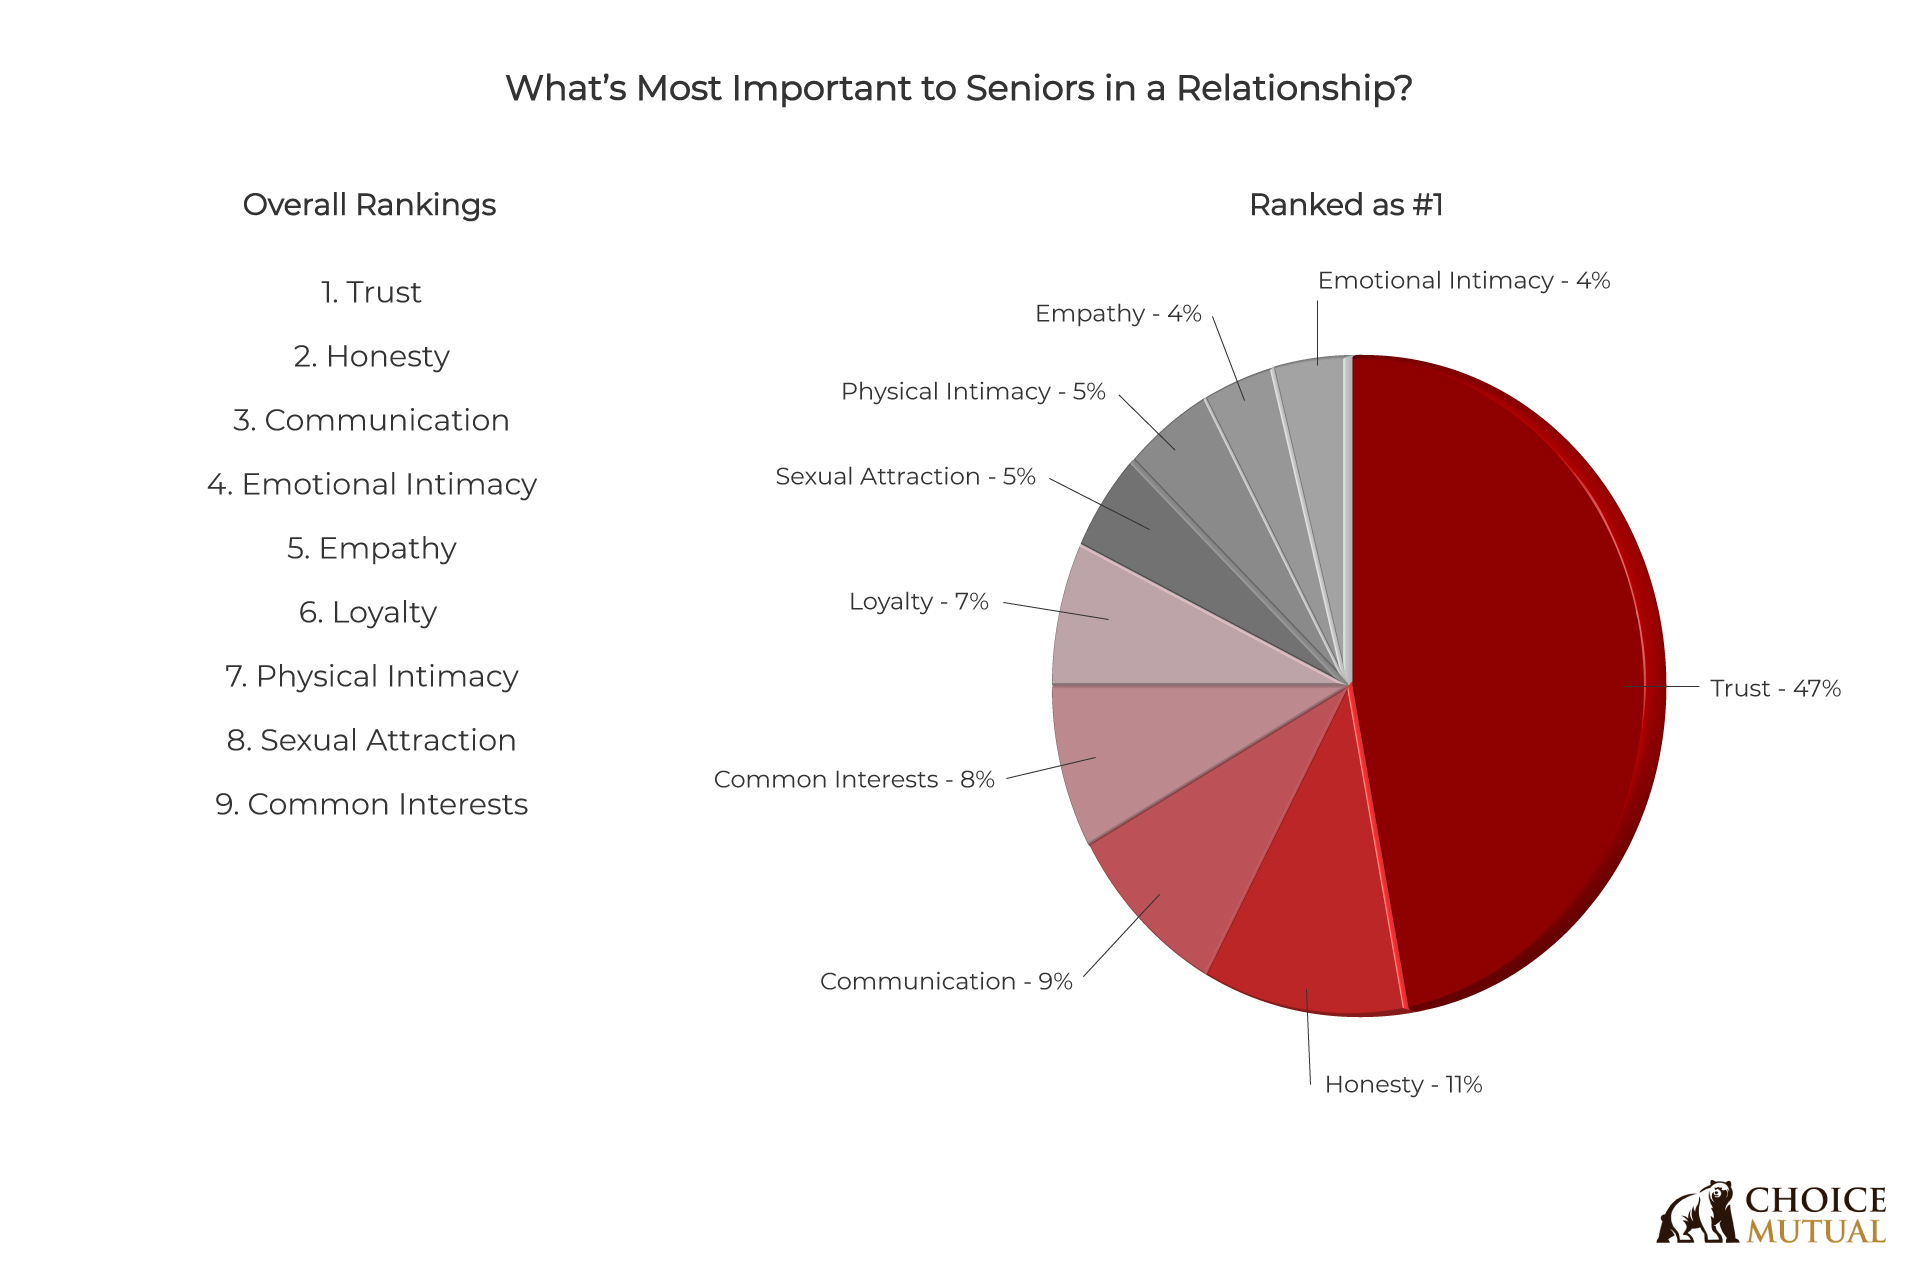 A pie chart showing the factors in a relationship that seniors most care about